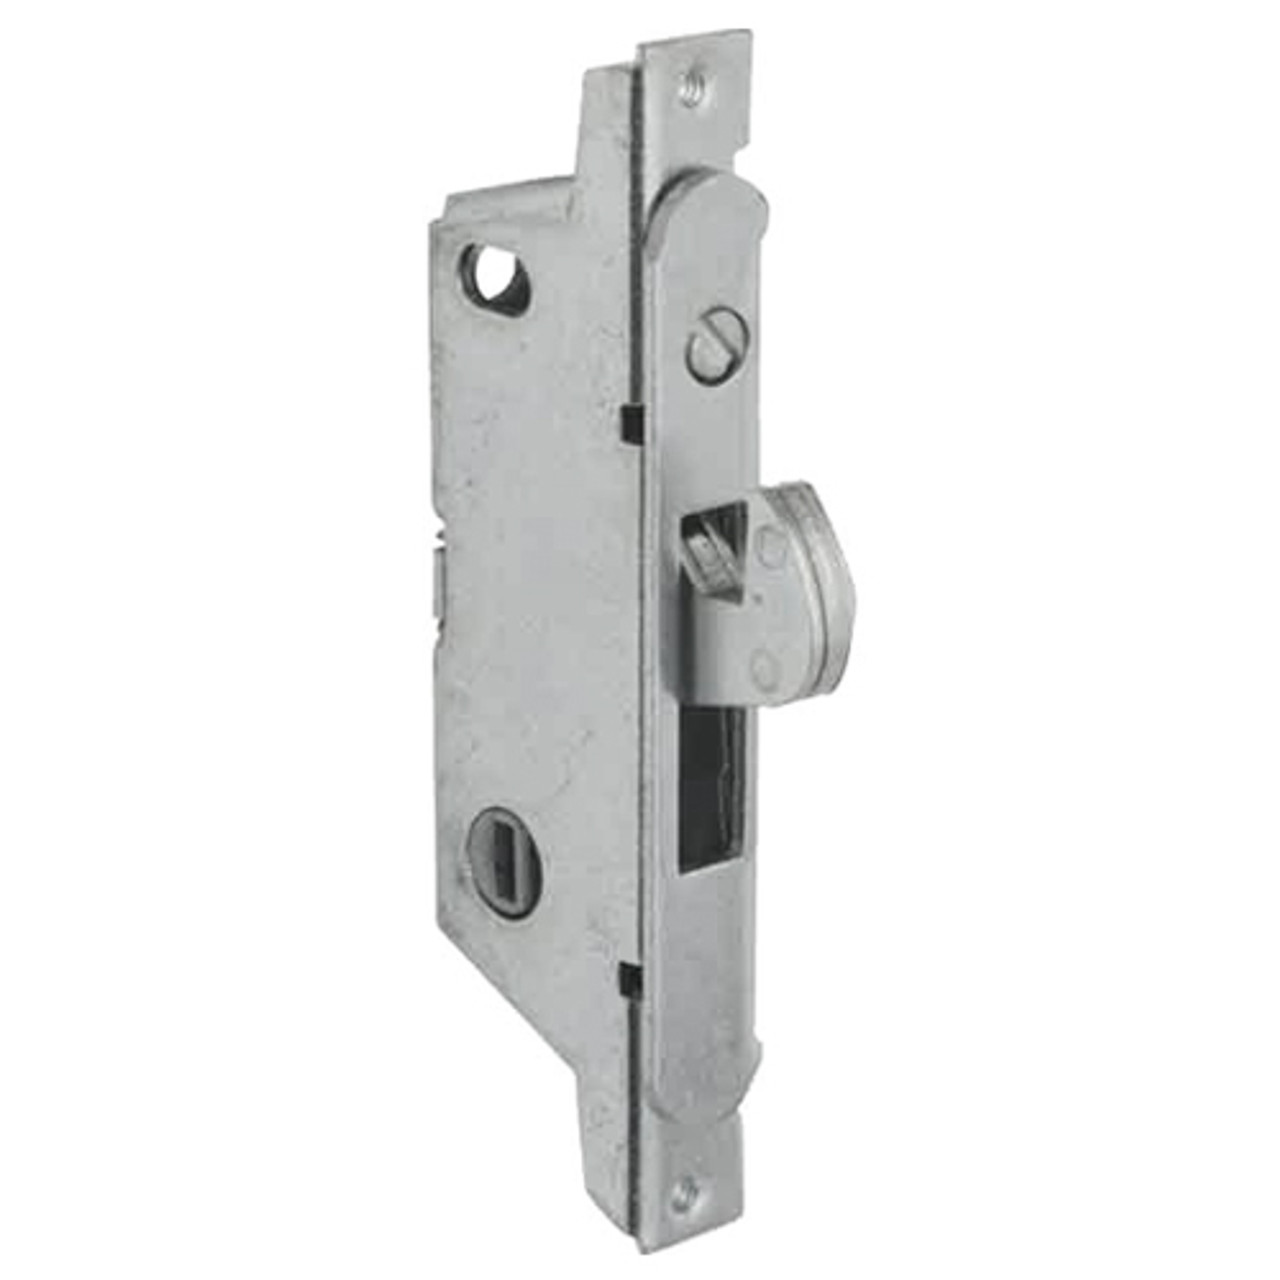 MS1847-11-630 Adams Rite MS Deadlatch with Radius Faceplate for Ultra-Narrow Stile Sliding Doors in Satin Stainless